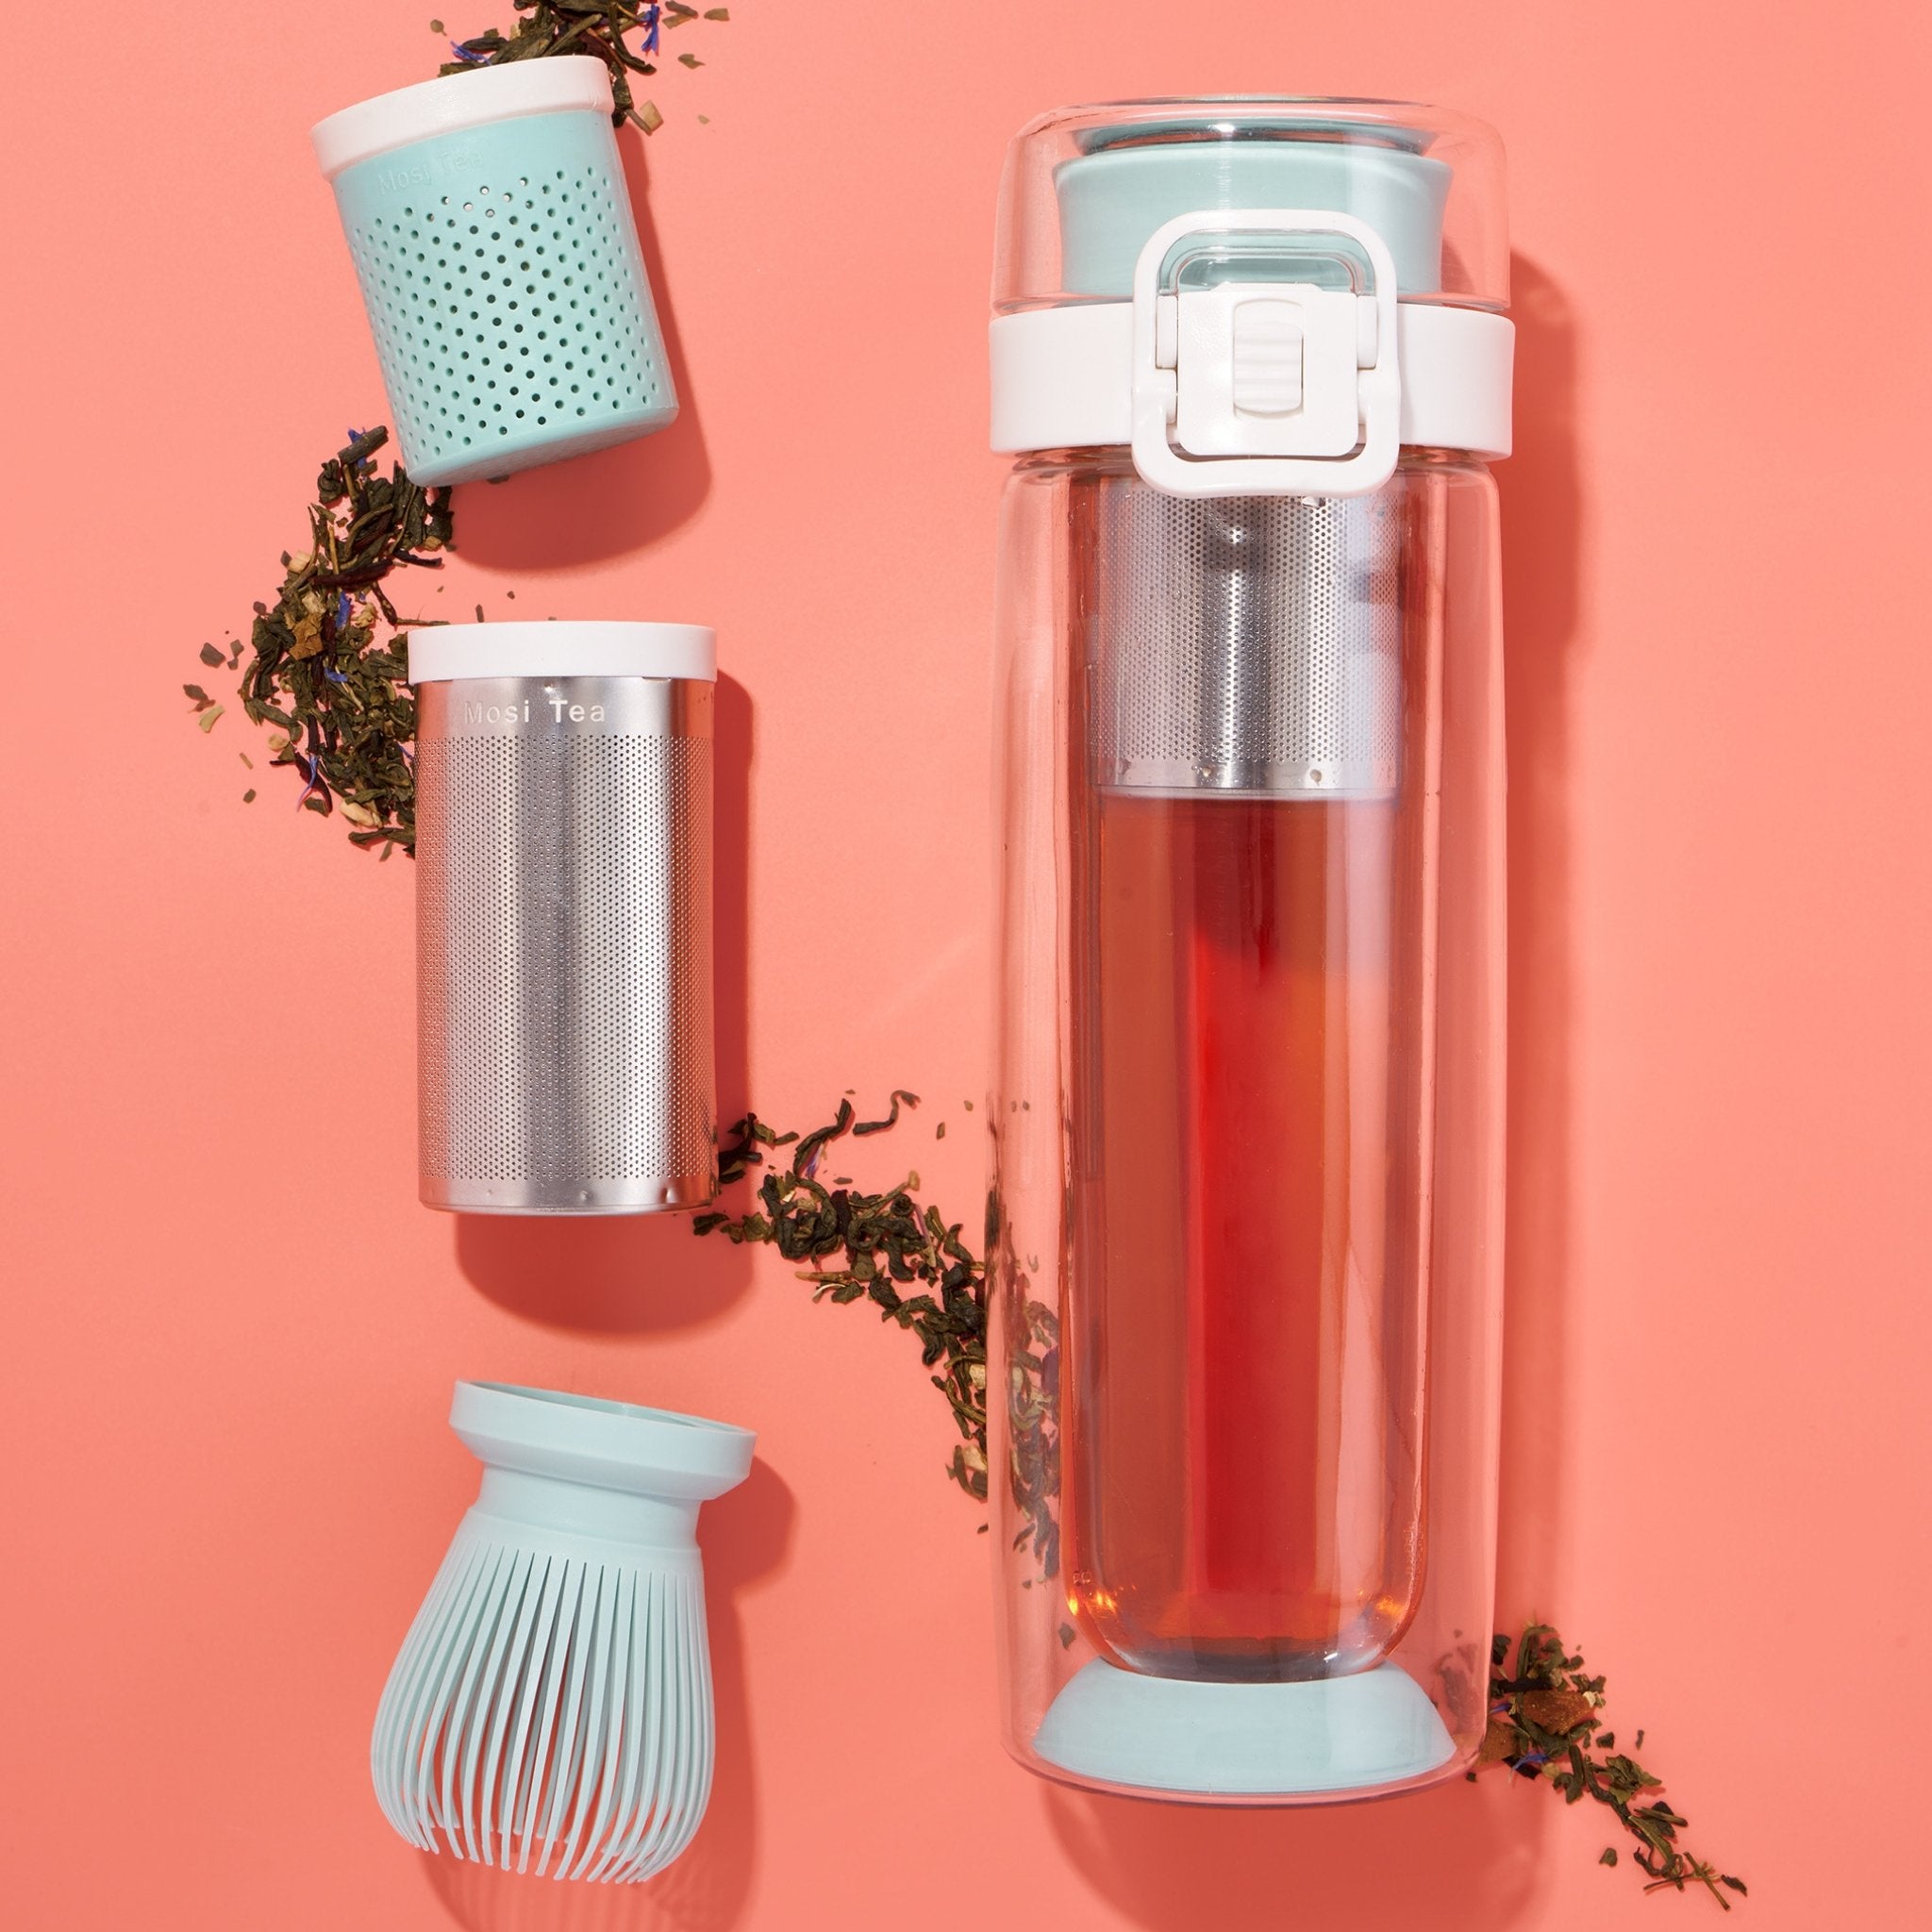 Mosi Tea – All in One Infuser for Tea, Matcha, Coffee, or Anything!